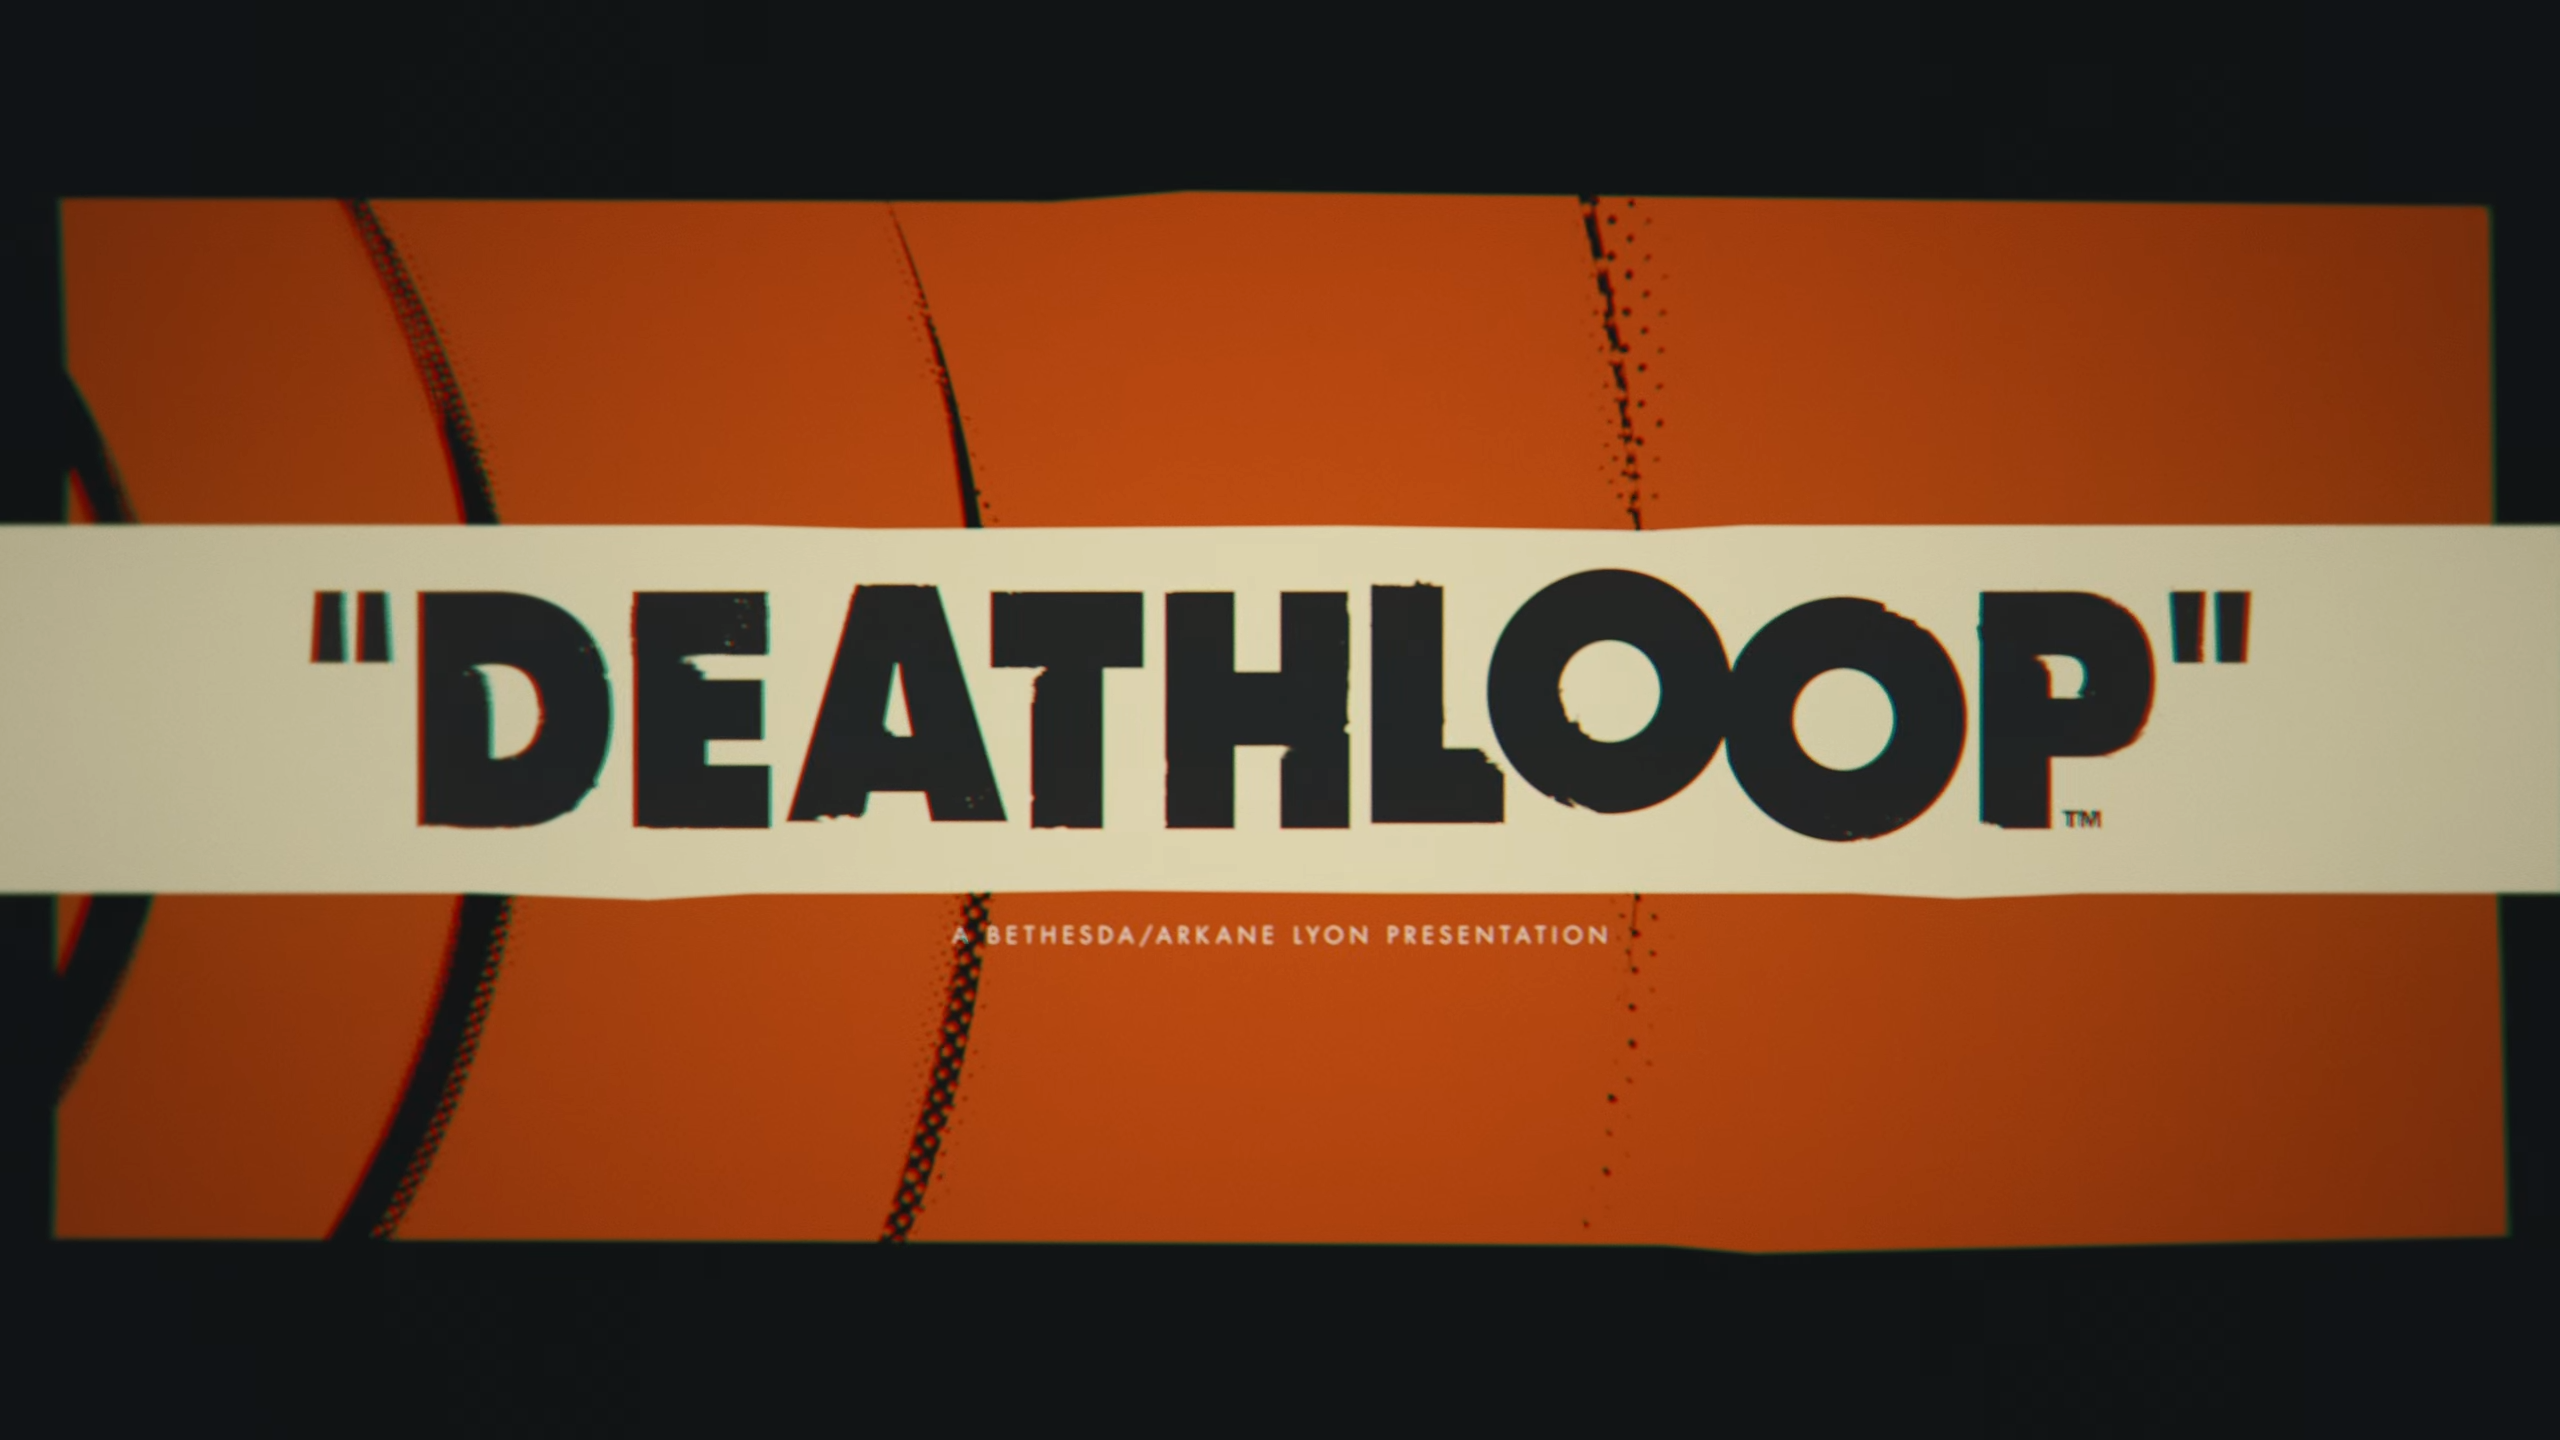 Xbox Game Pass Lineup for September 2022 Revealed: Deathloop